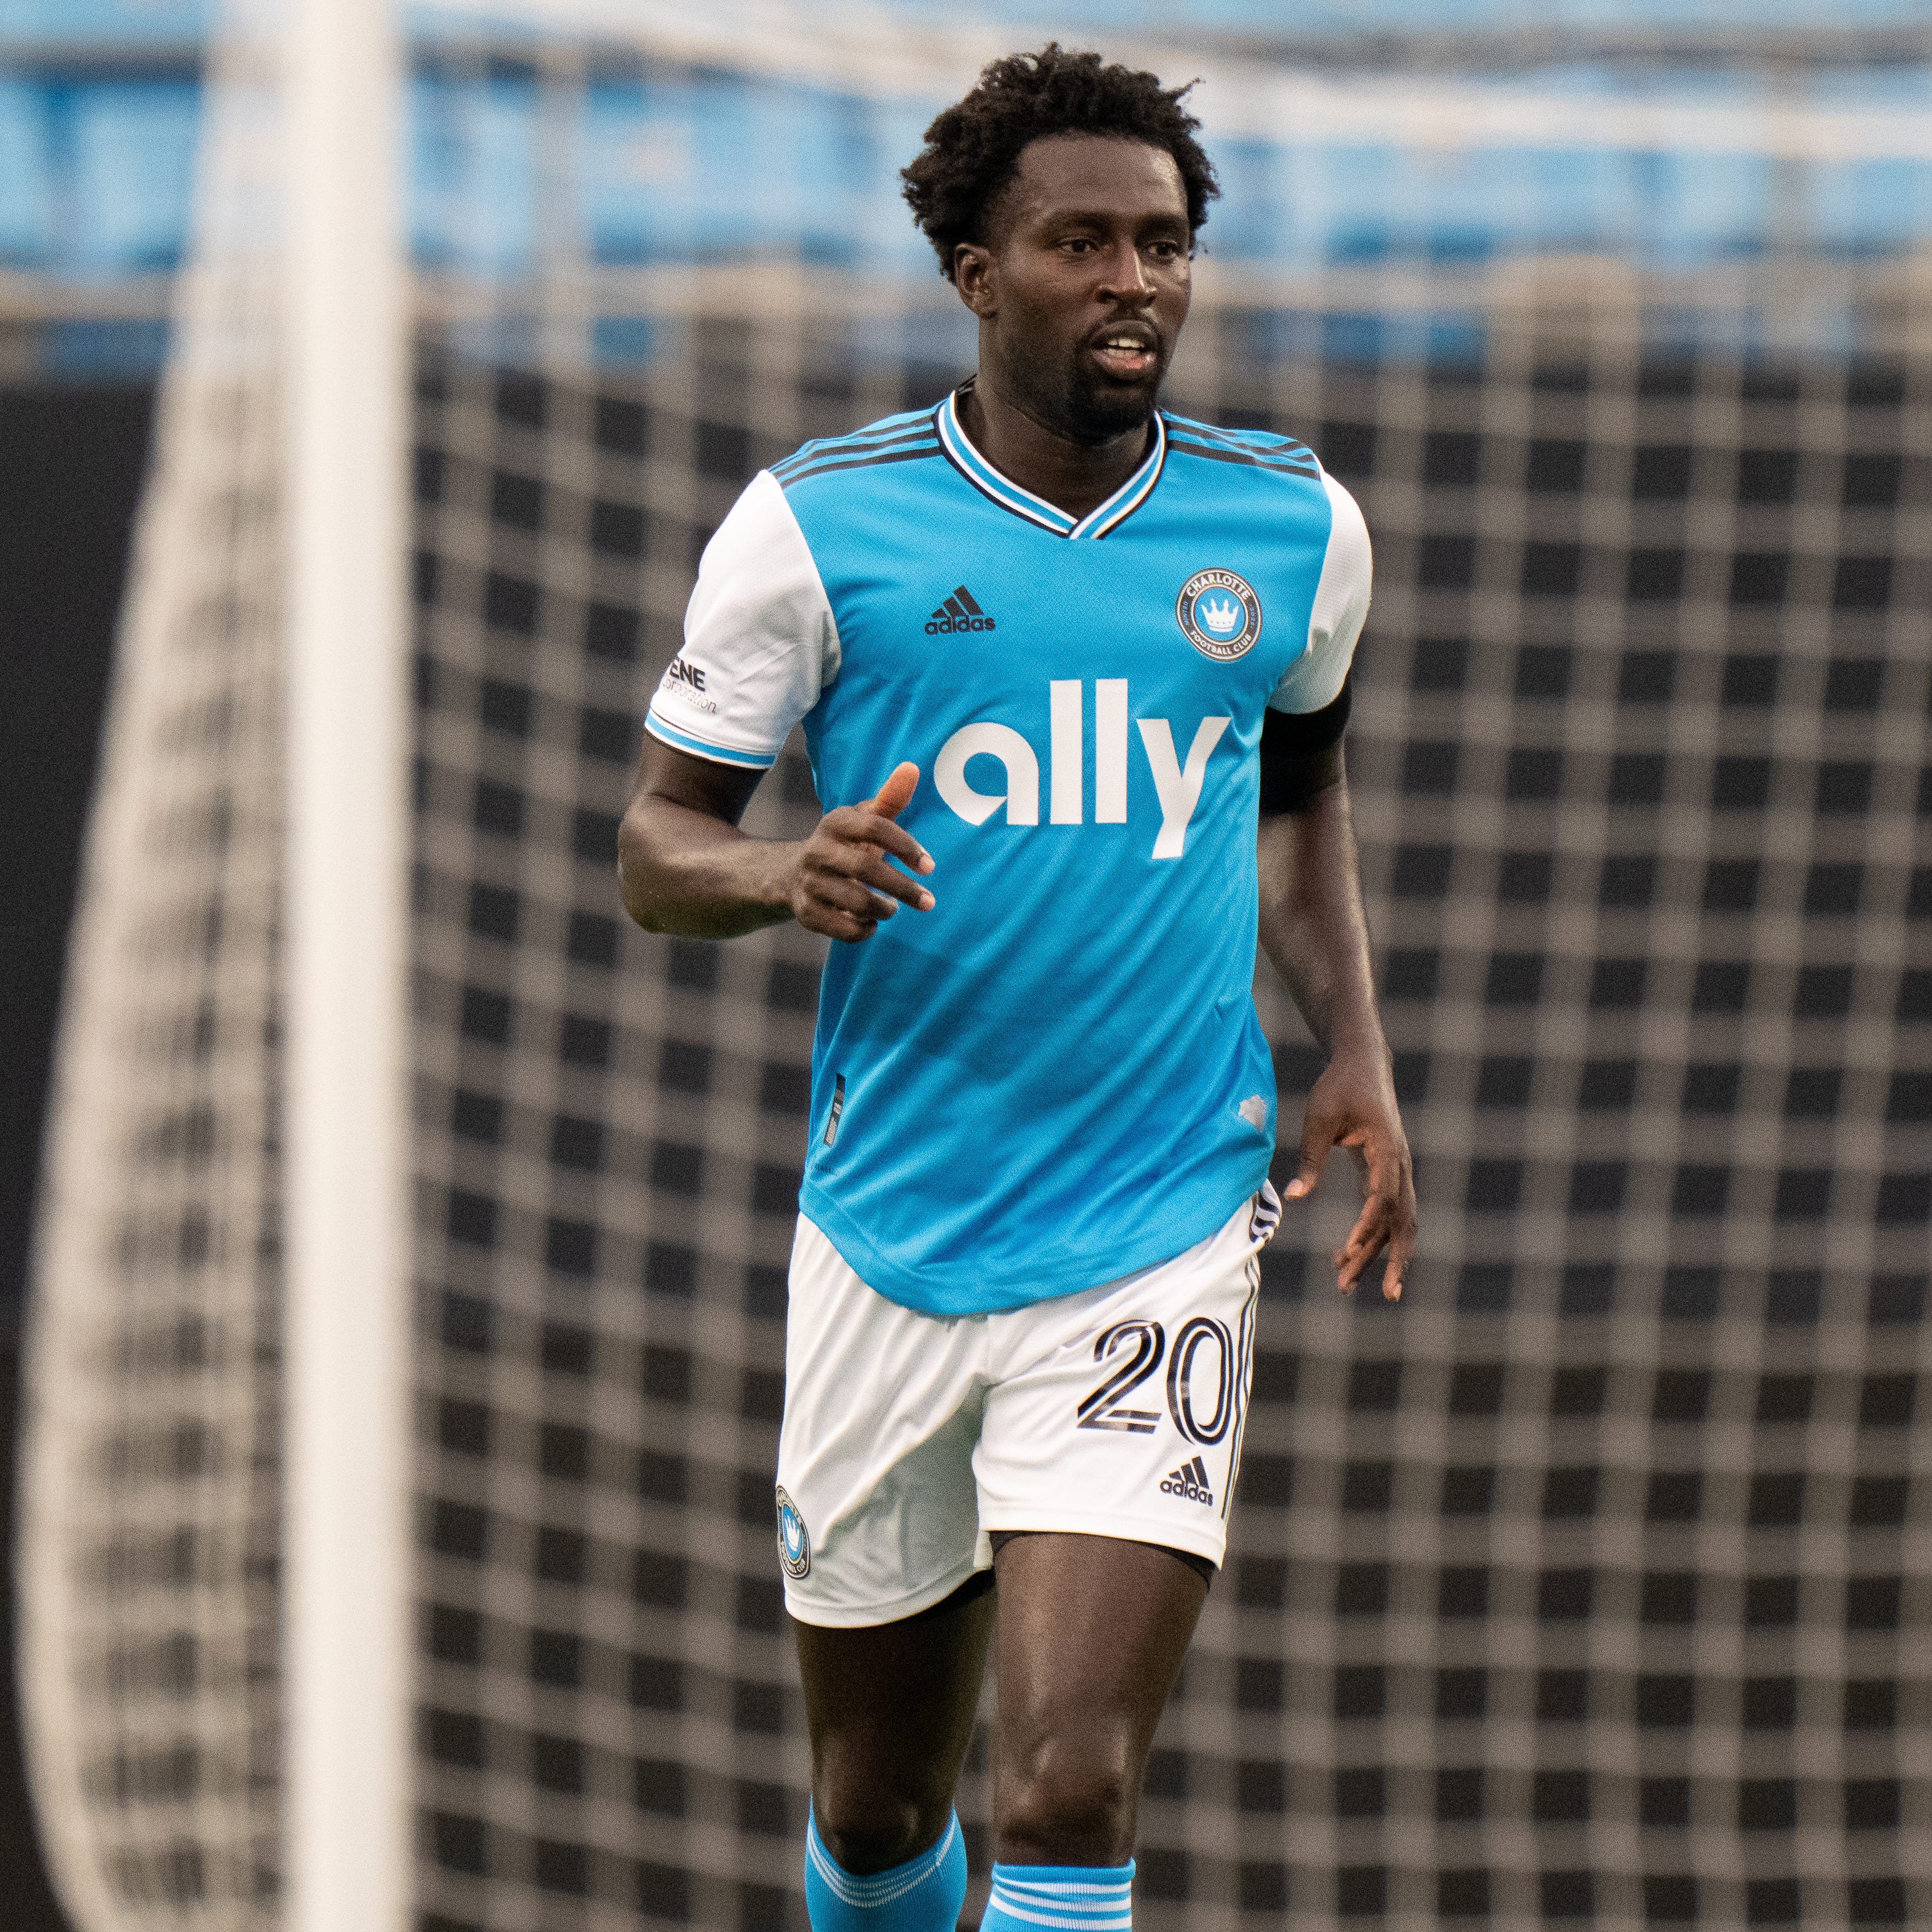 Charlotte FC moves to fill gaps at center back